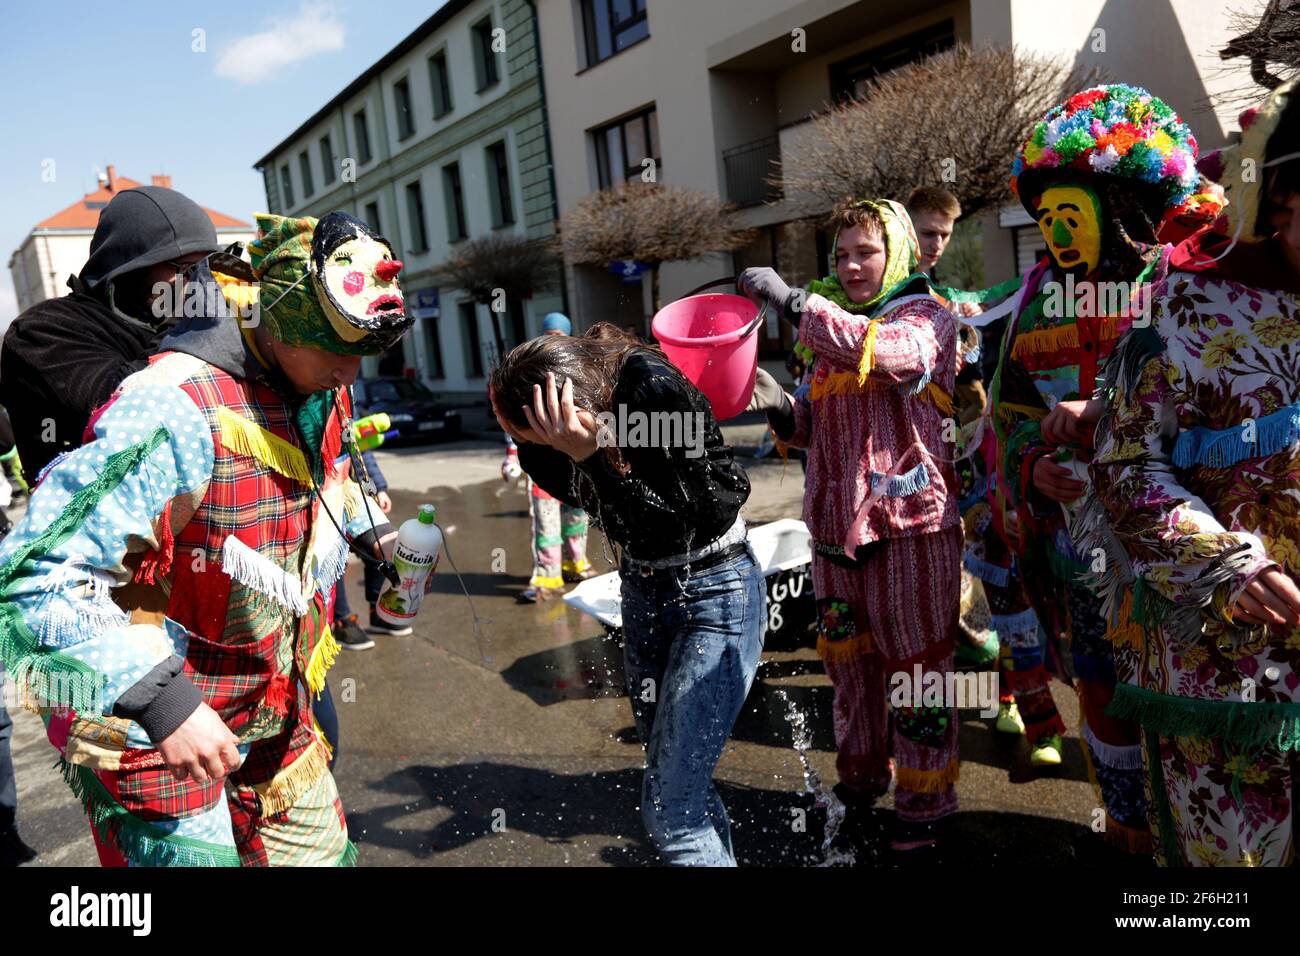 Wilamowice, Poland - April 2, 2018: Easter celebrations in Poland. Wilamowickie Smiergusty. A regional, long-standing, folk tradition focuses on pouring water on girls by boys on Easter Monday at the Market Square in Wilamowice in southern Poland. Śmiergustnicy are groups of costumers who wear colorful, traditional Smiergustnica costumes Stock Photo